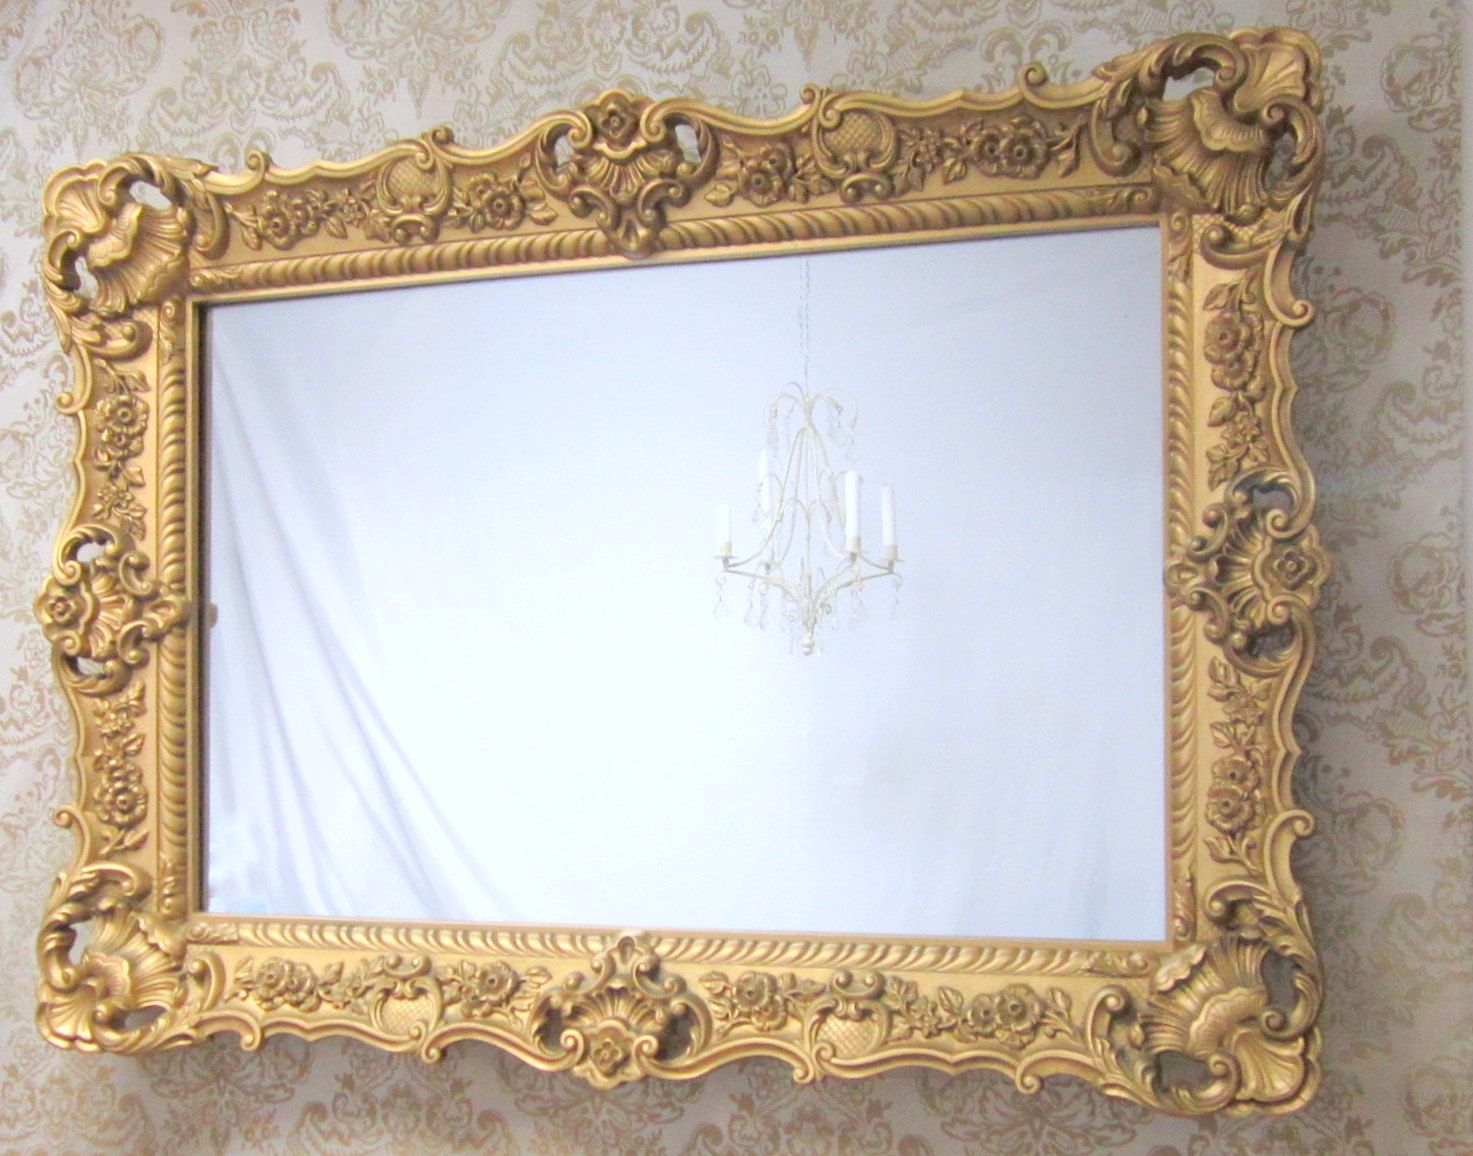 140 Best Images About Decorative Ornate Antique Vintage Mirrors Regarding Large Vintage Mirrors For Sale (View 3 of 15)